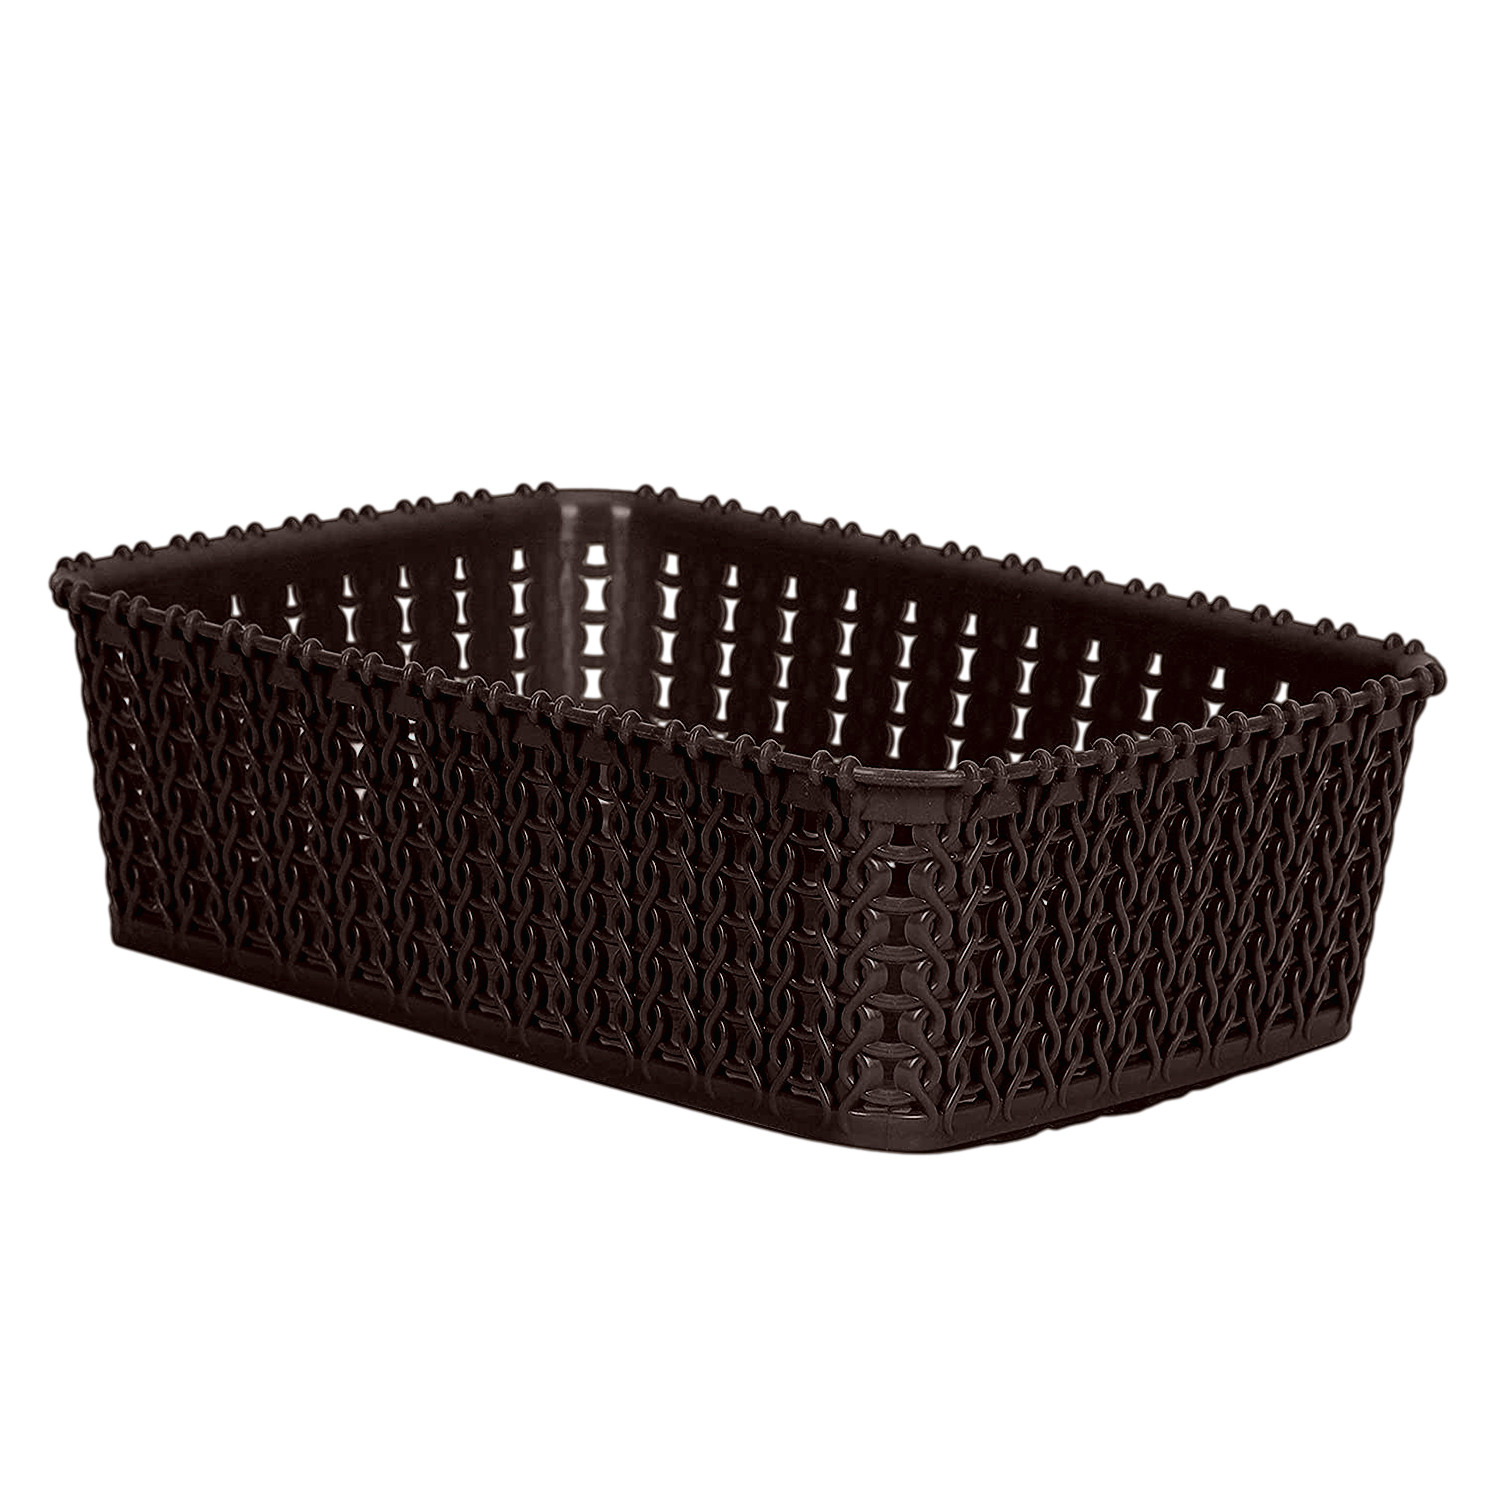 Kuber Industries Multiuses Small M 15 Plastic Tray/Basket/Organizer Without Lid-(Grey & Brown) -46KM0125